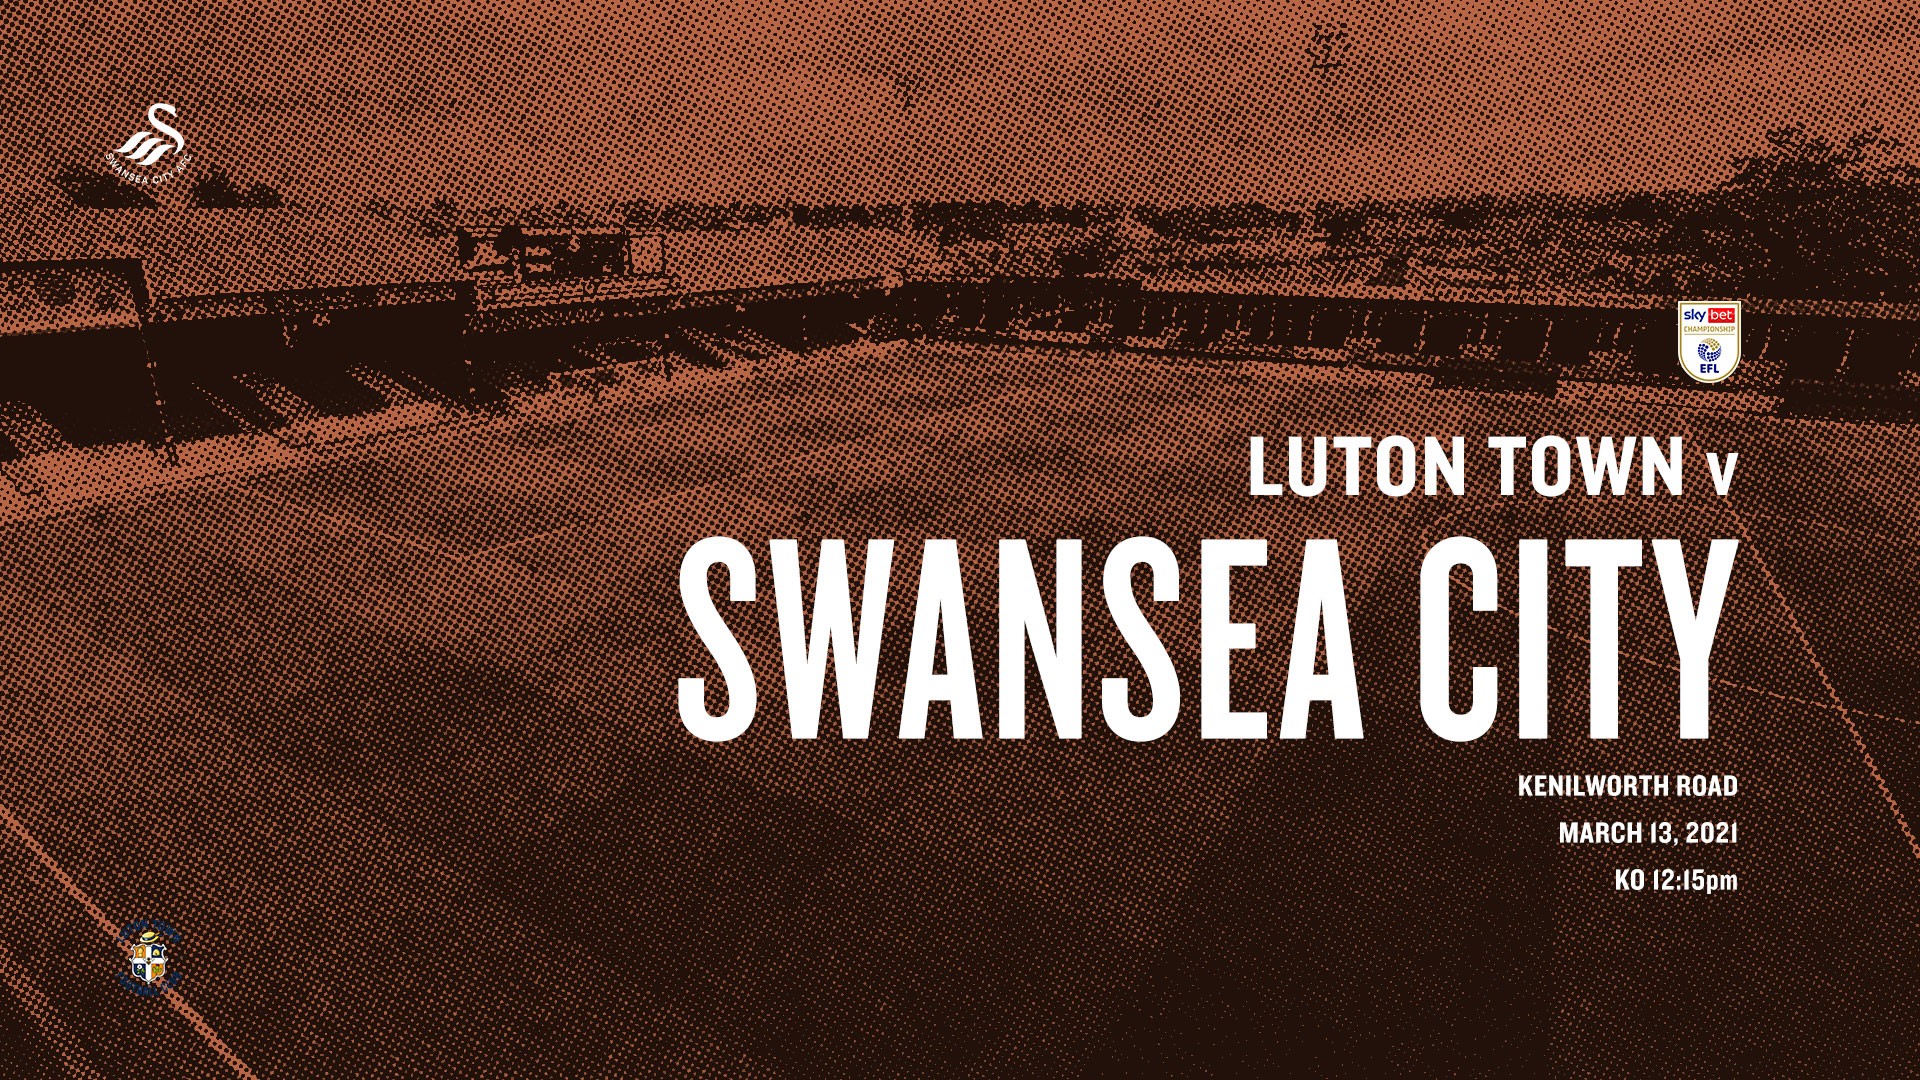 Luton away preview graphic